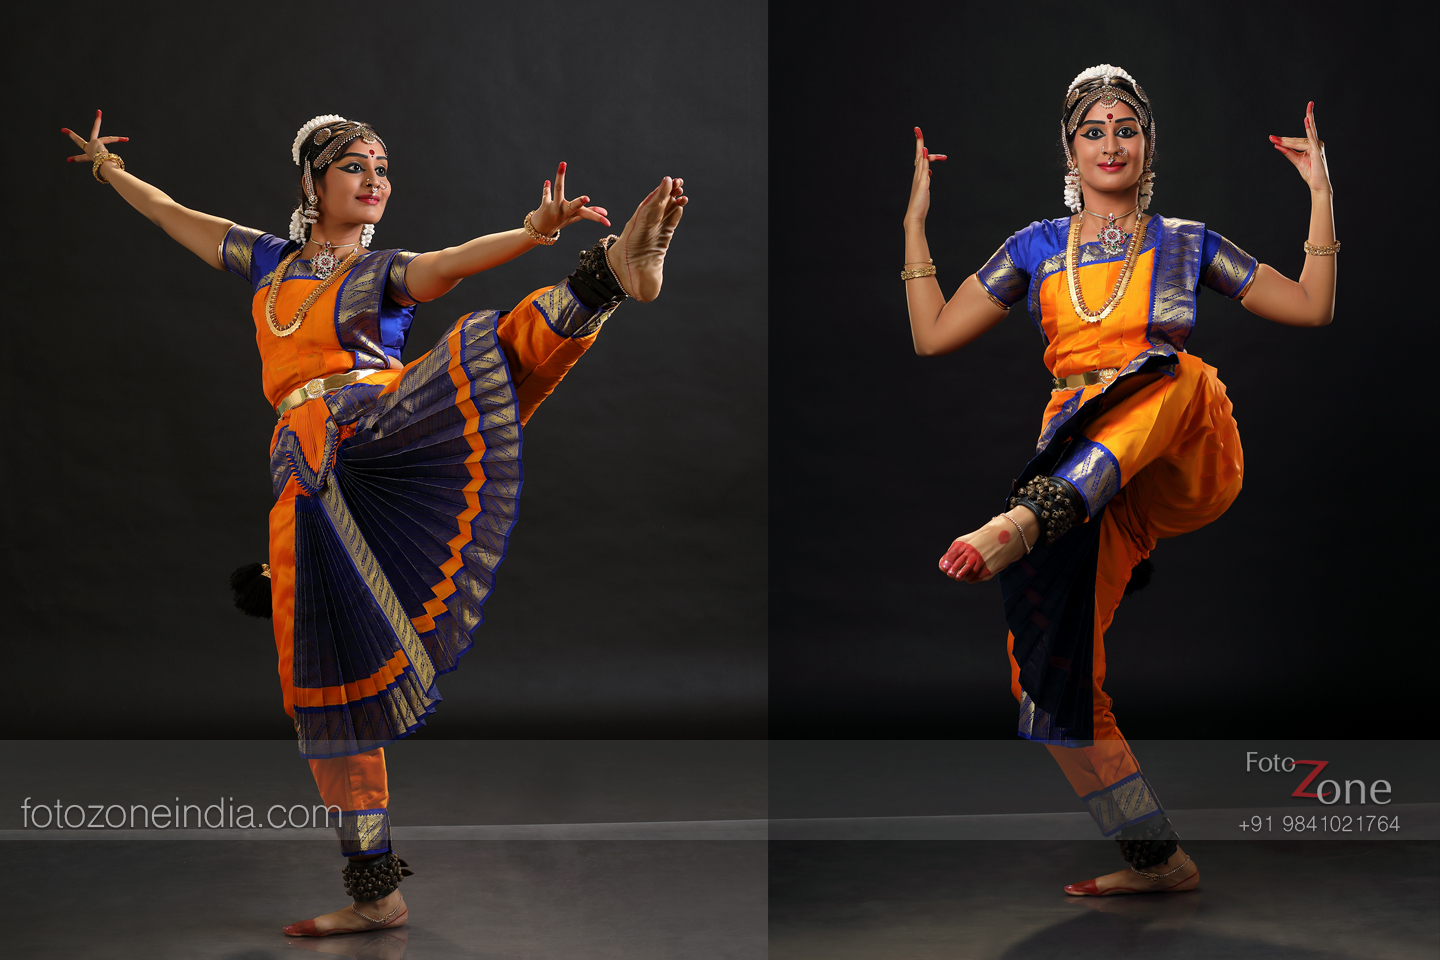 Dancing the Narrative: Women's Bodies and the Politics of Control in Kathak  – Women's Development, Taboos, Gender